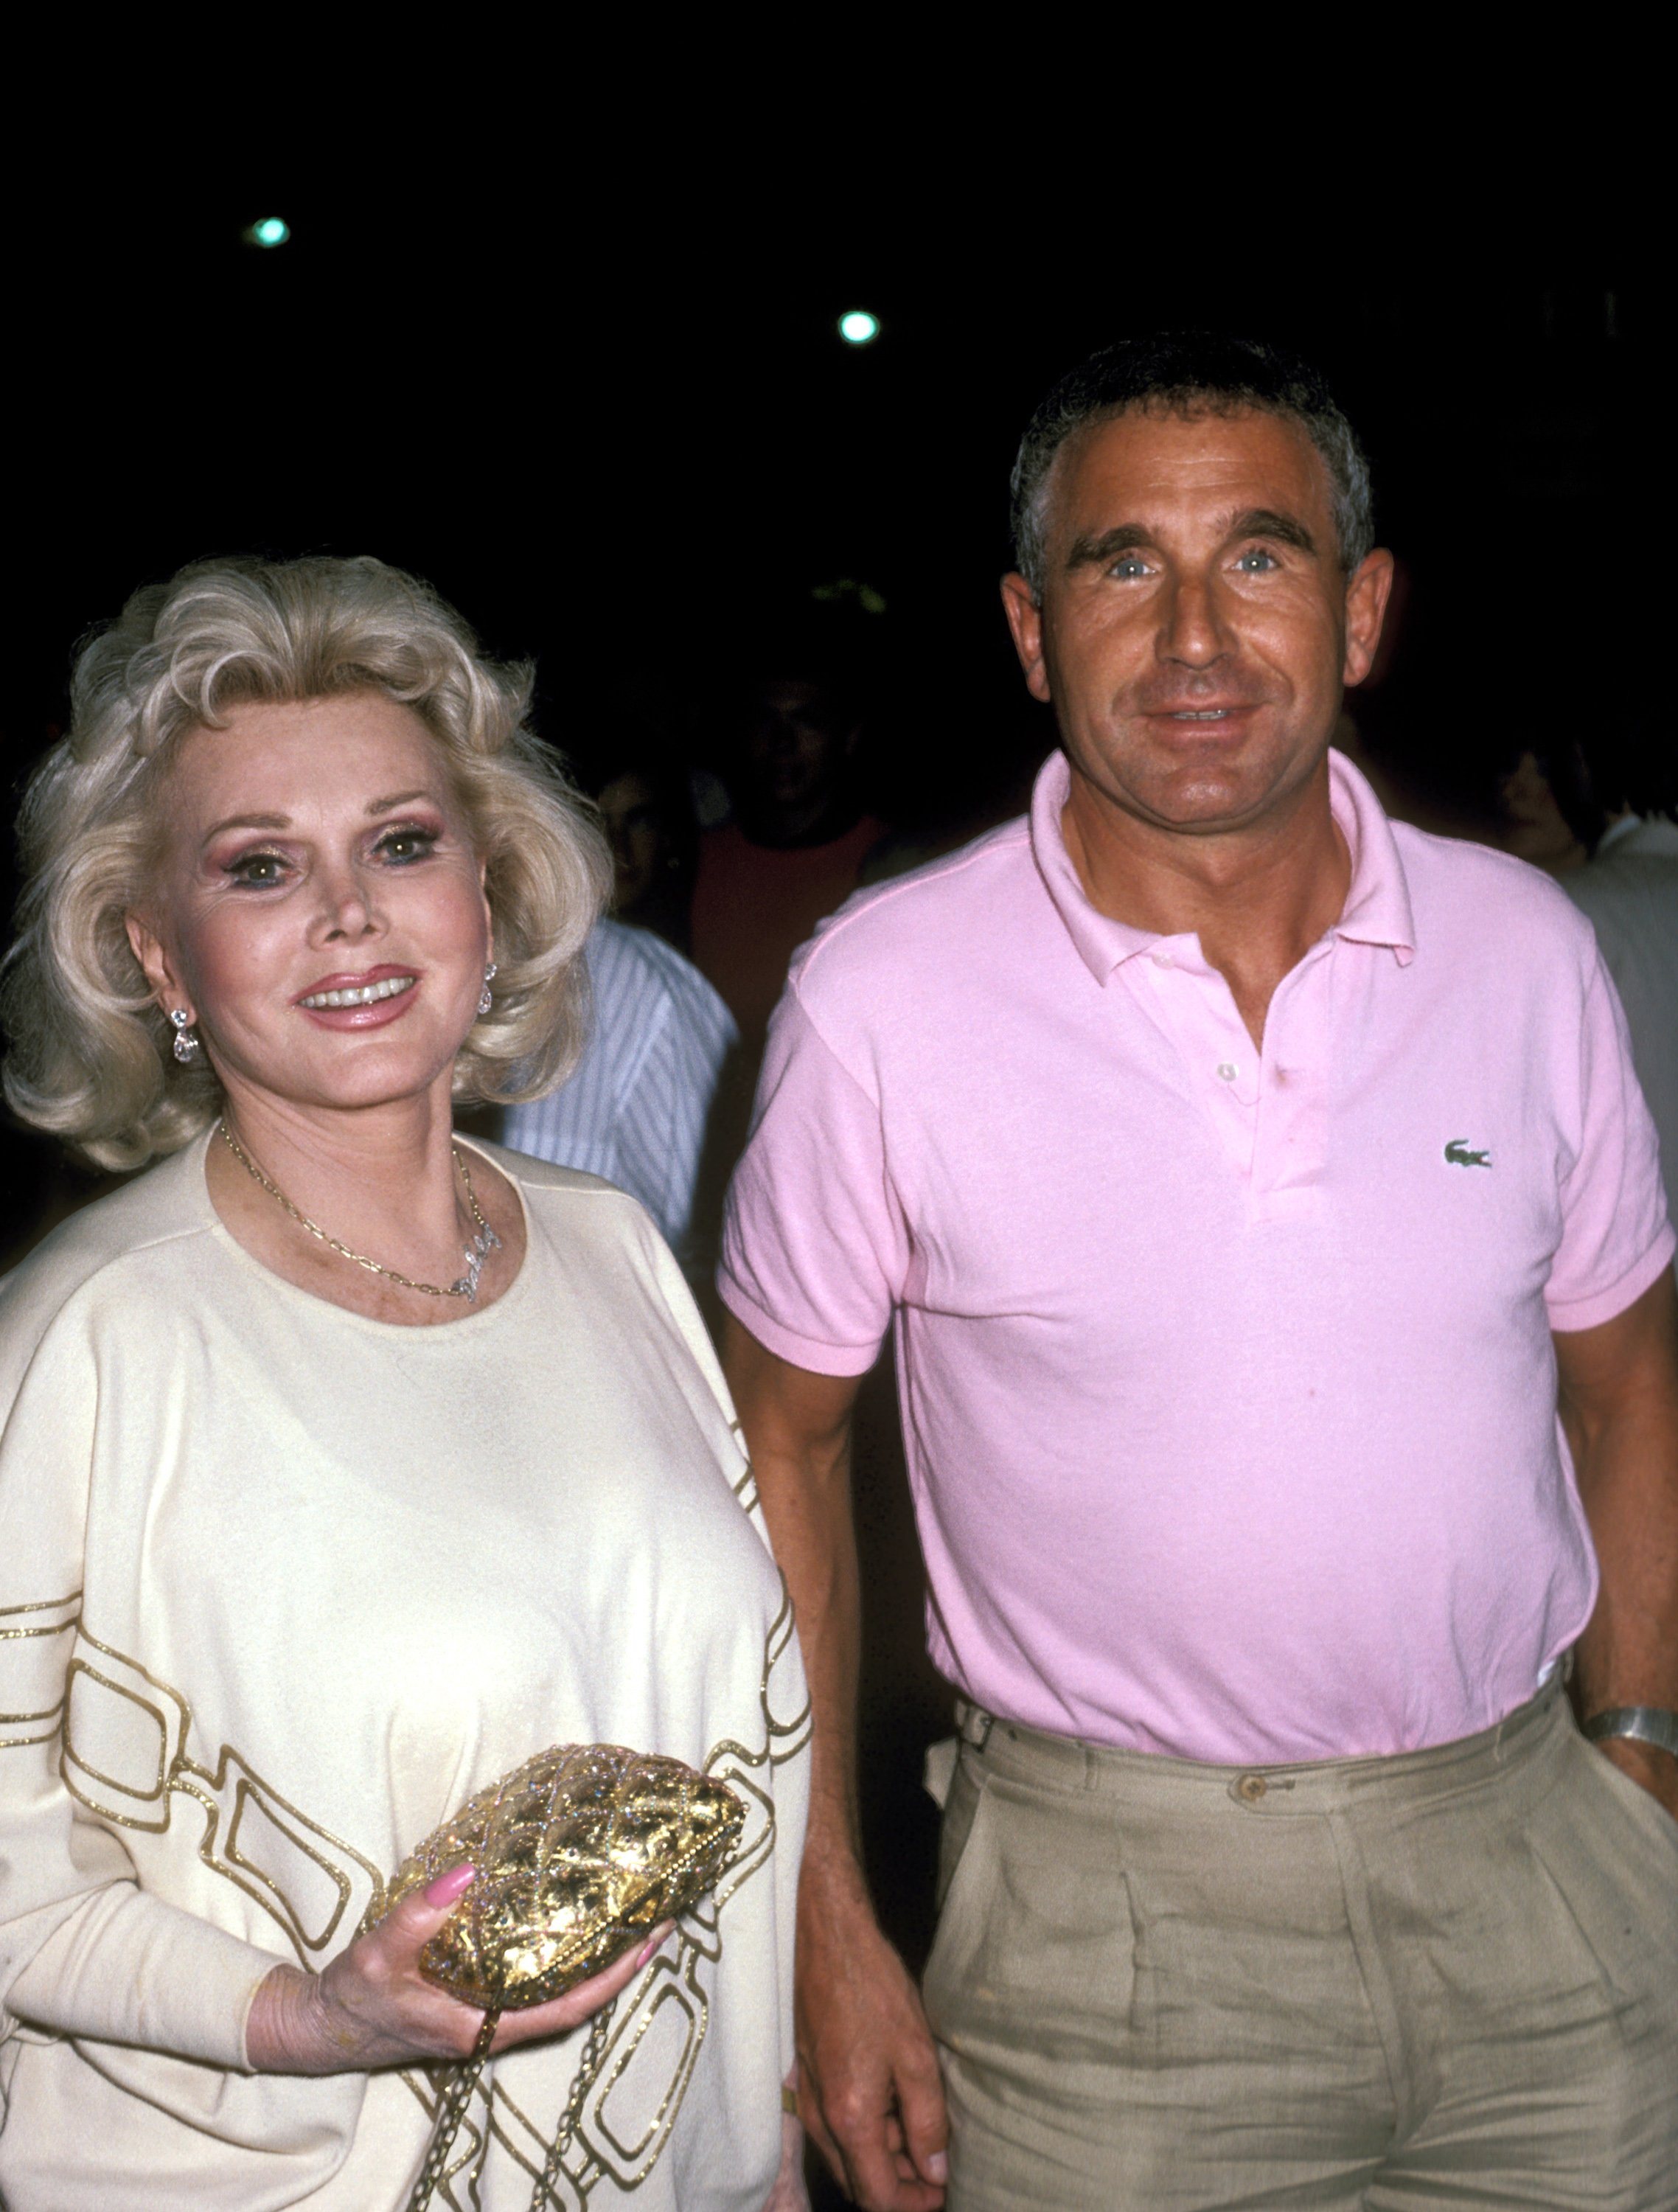 Zsa Zsa Gabor and Prince Von Anhalt in Beverly Hills, California on January 16, 1982. | Source: Ron Galella/Ron Galella Collection/Getty Images